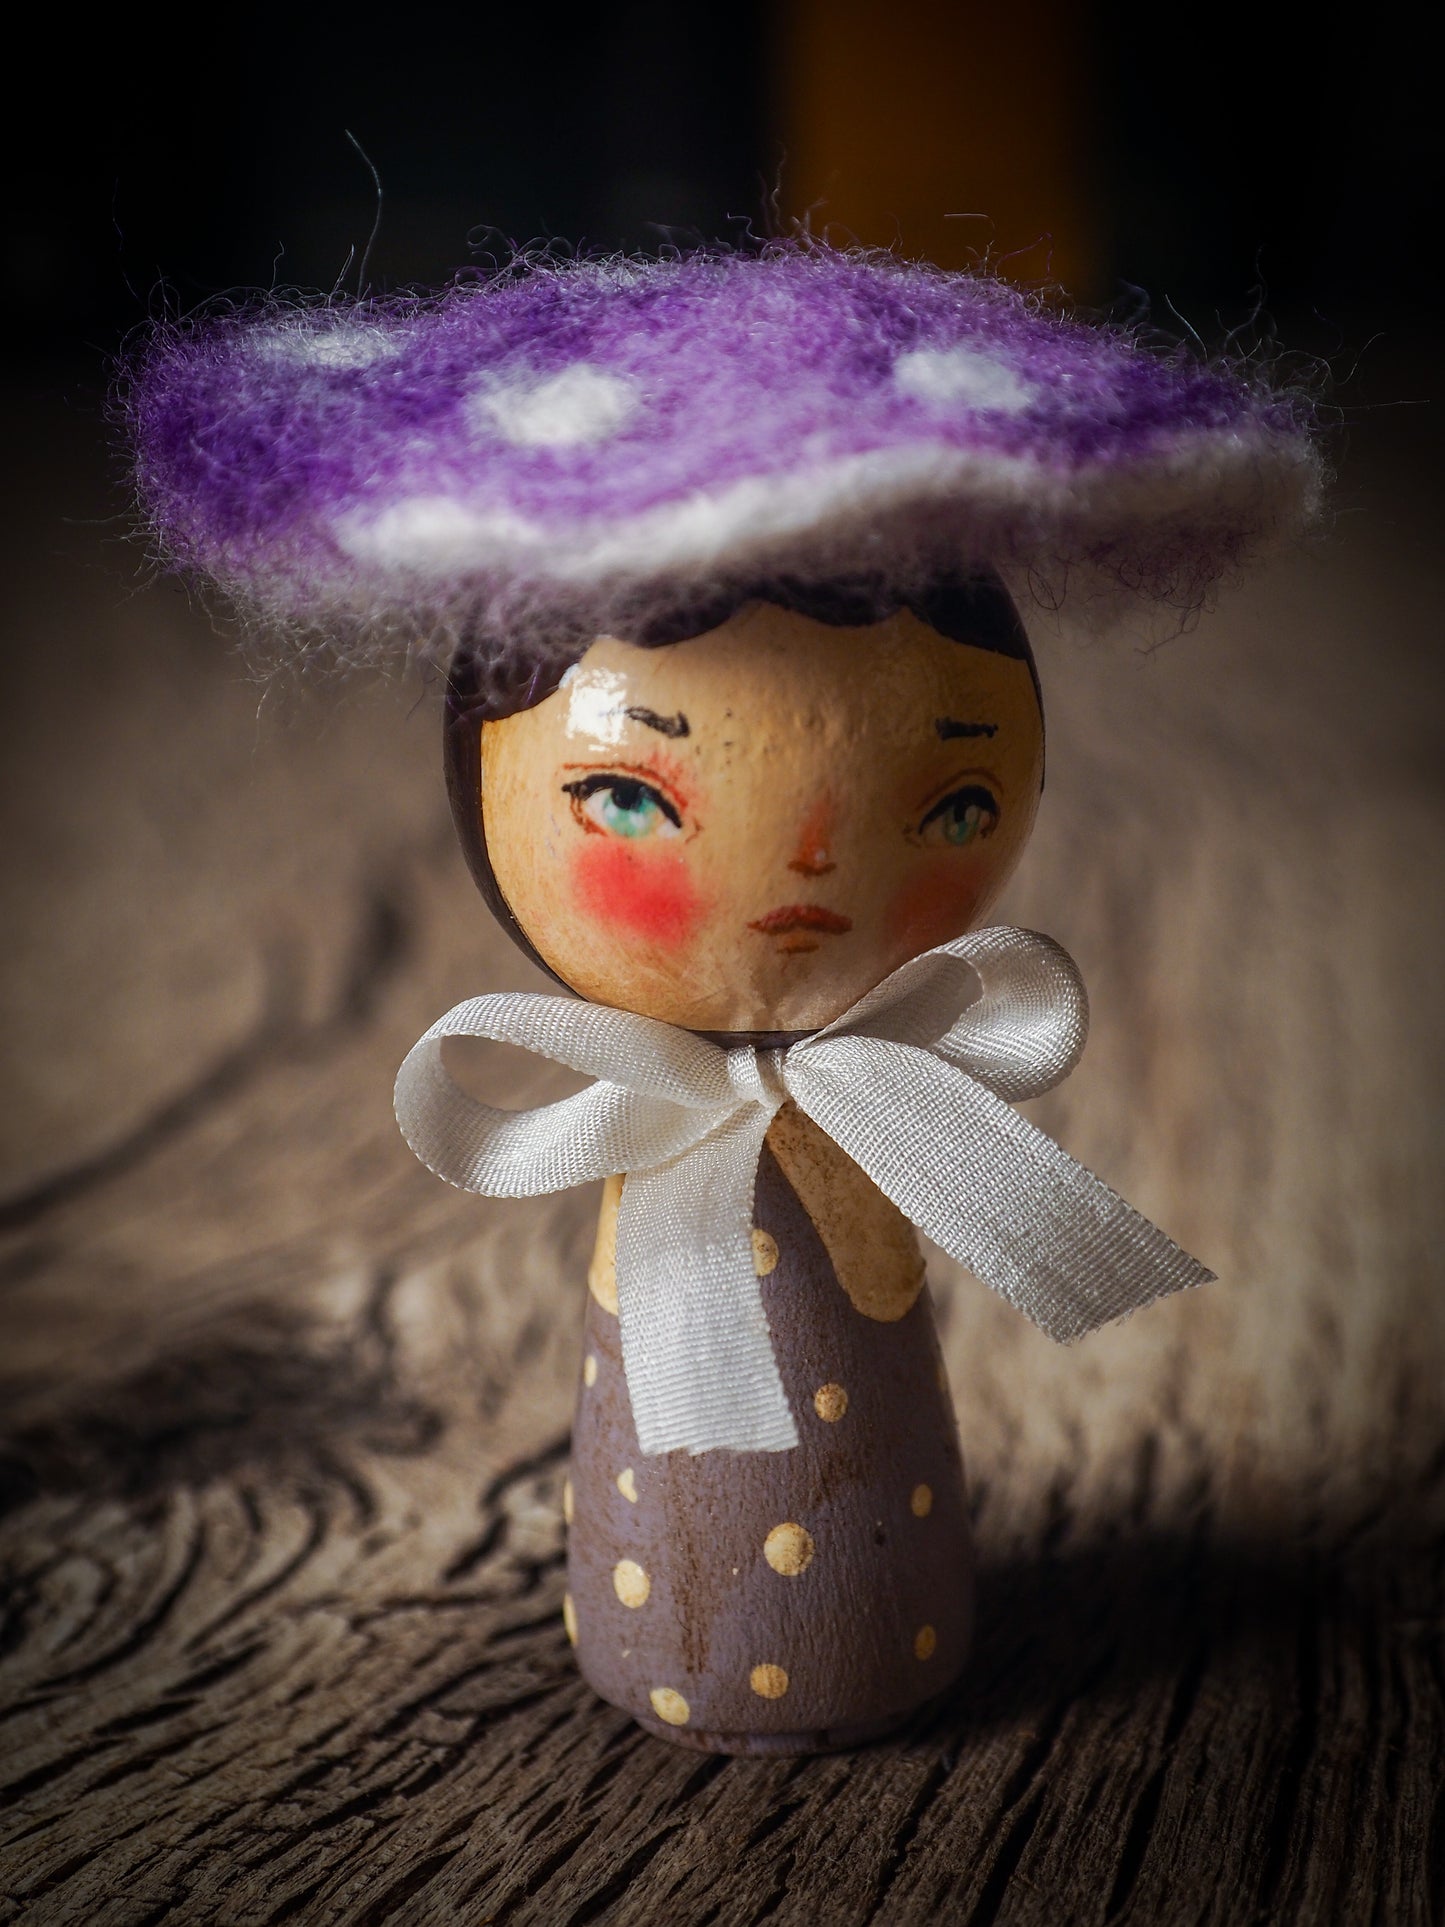 A beautiful collection of Mushroom dolls by Idania Salcido, the artist behind Danita Art. Each little wooden kokeshi doll is hand made by Danita Art with hand painted wood body, expressive and unique faces with a unique personality. Topped by a mushroom felted organic wool cap for a woodland feel to them.